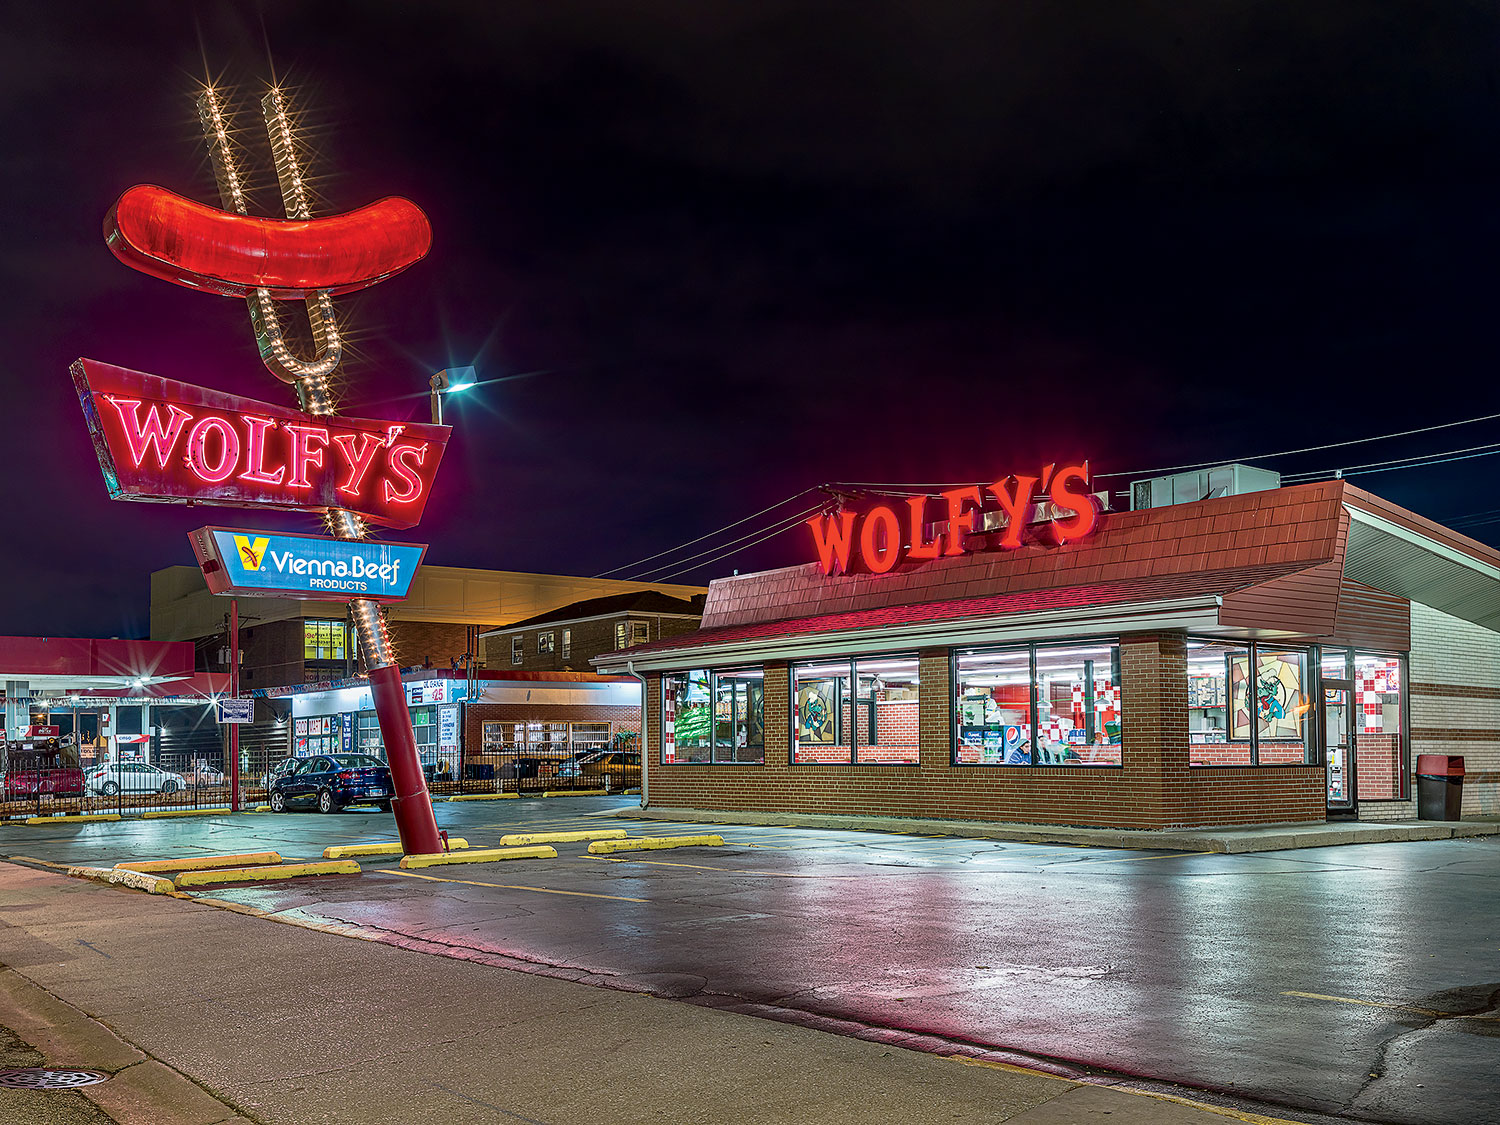 Wolfy's storefront